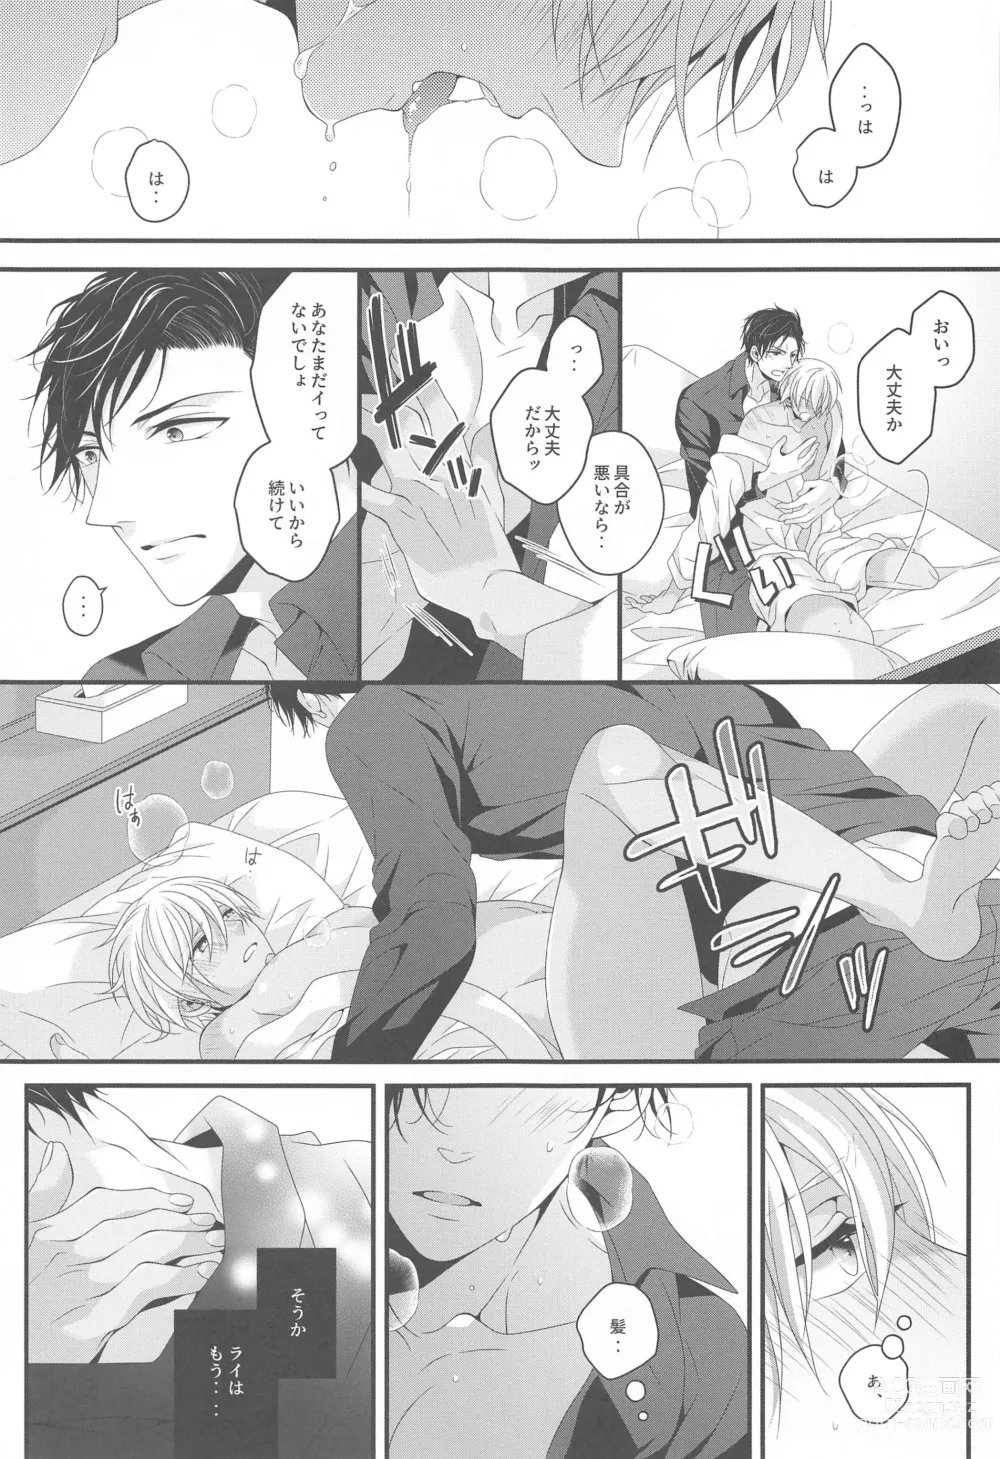 Page 22 of doujinshi Aibetsuriku no Yosame - A rainy night the pain of separation from loved ones